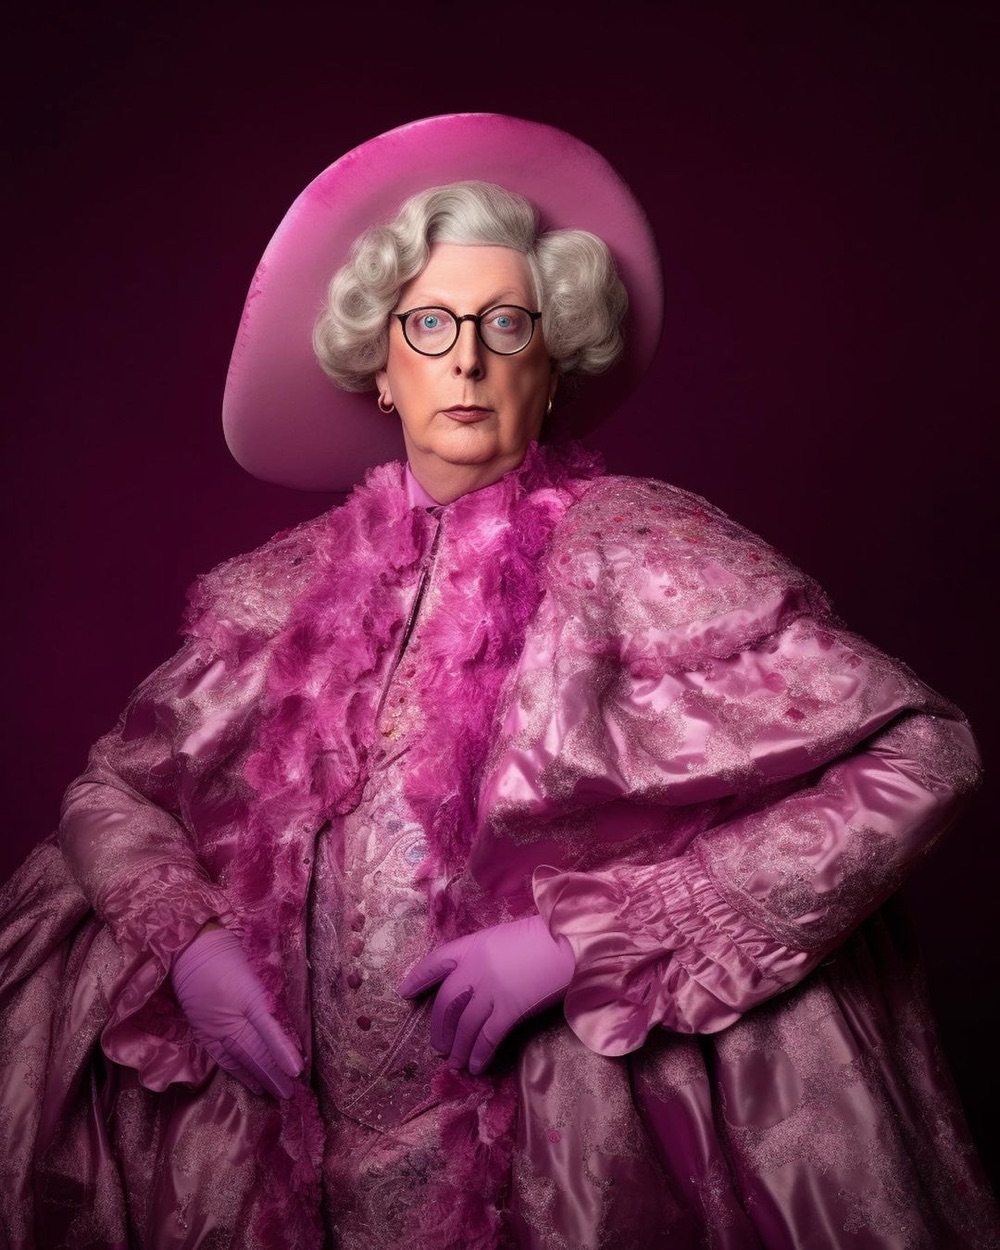 Mitch McConnell in drag